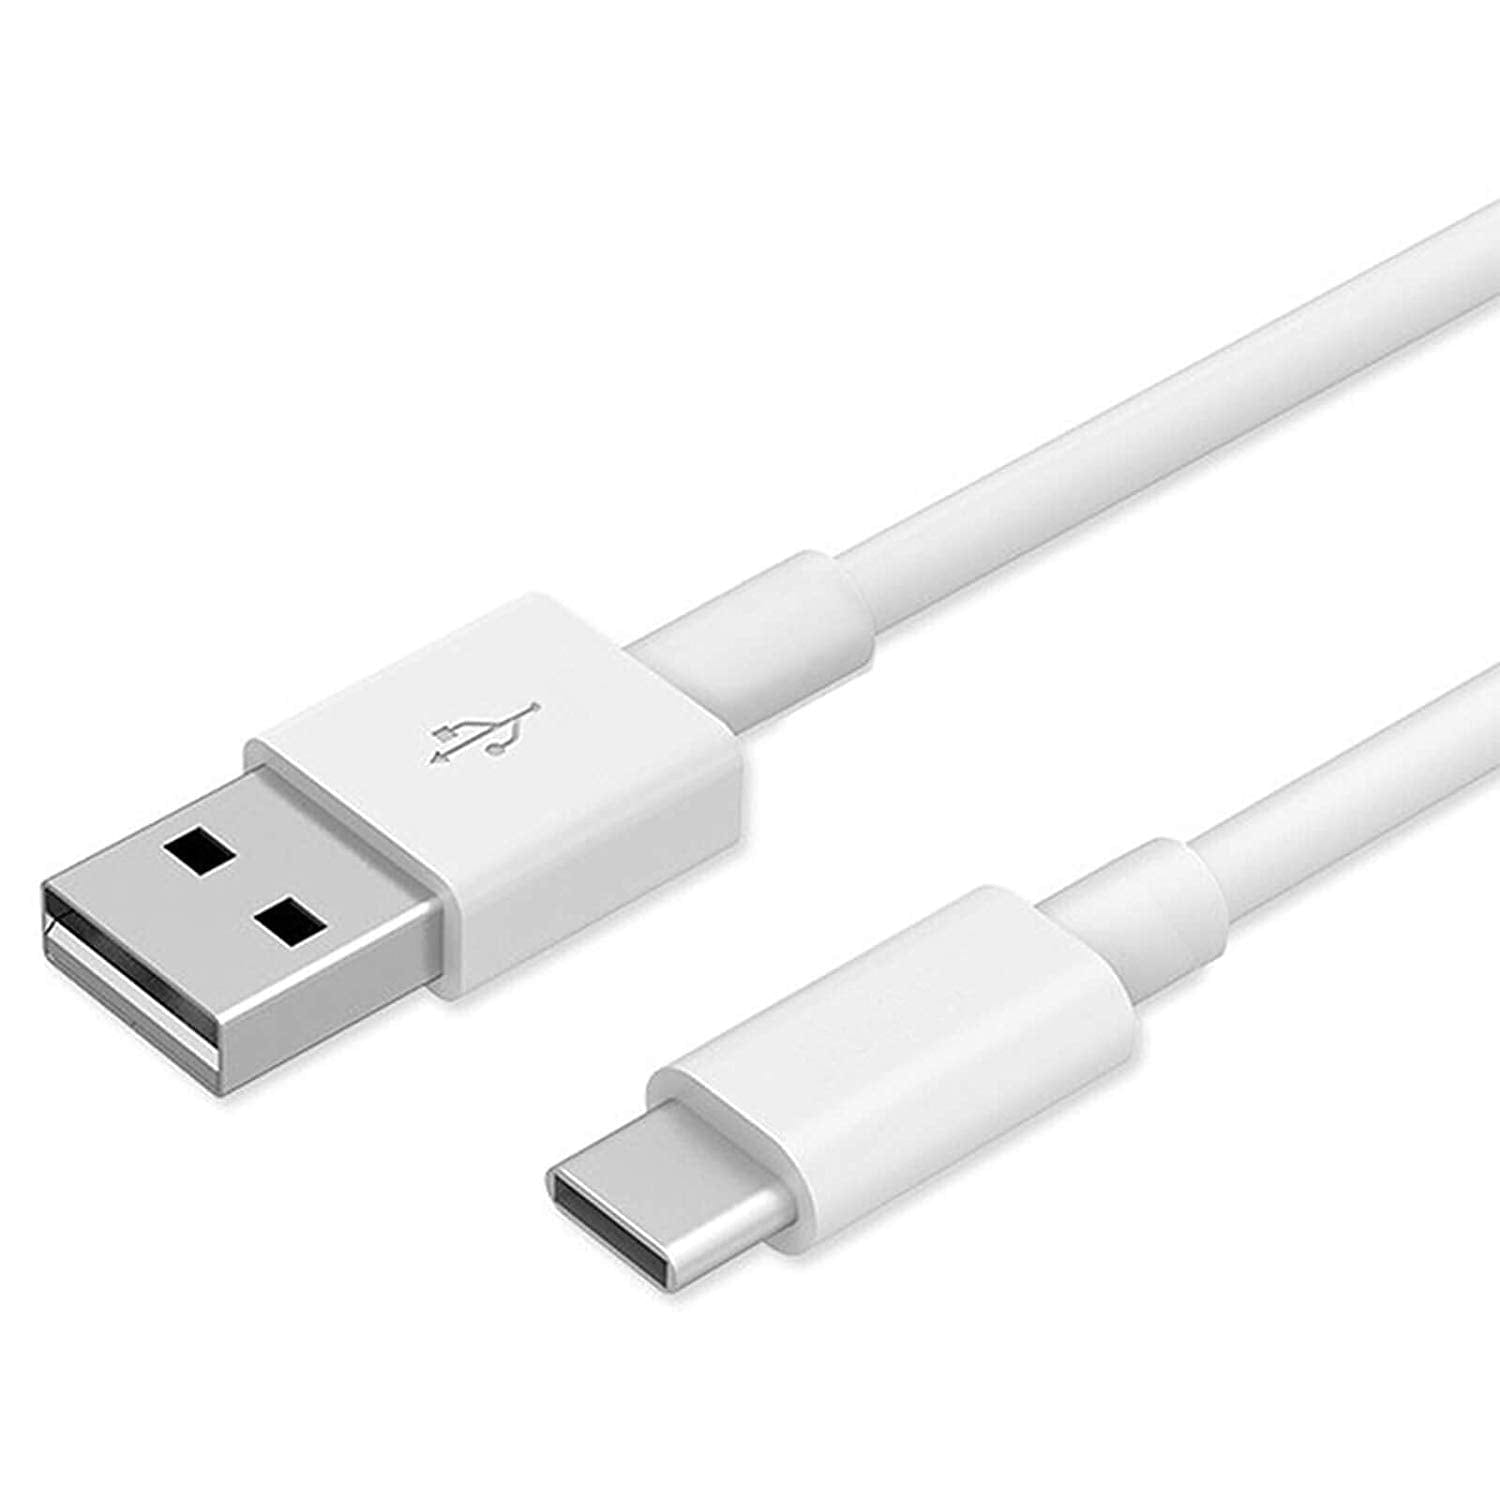 Samsung Galaxy S20 USB to Type C Charging Cable Lead White - 1M - SmartPhoneGadgetUK